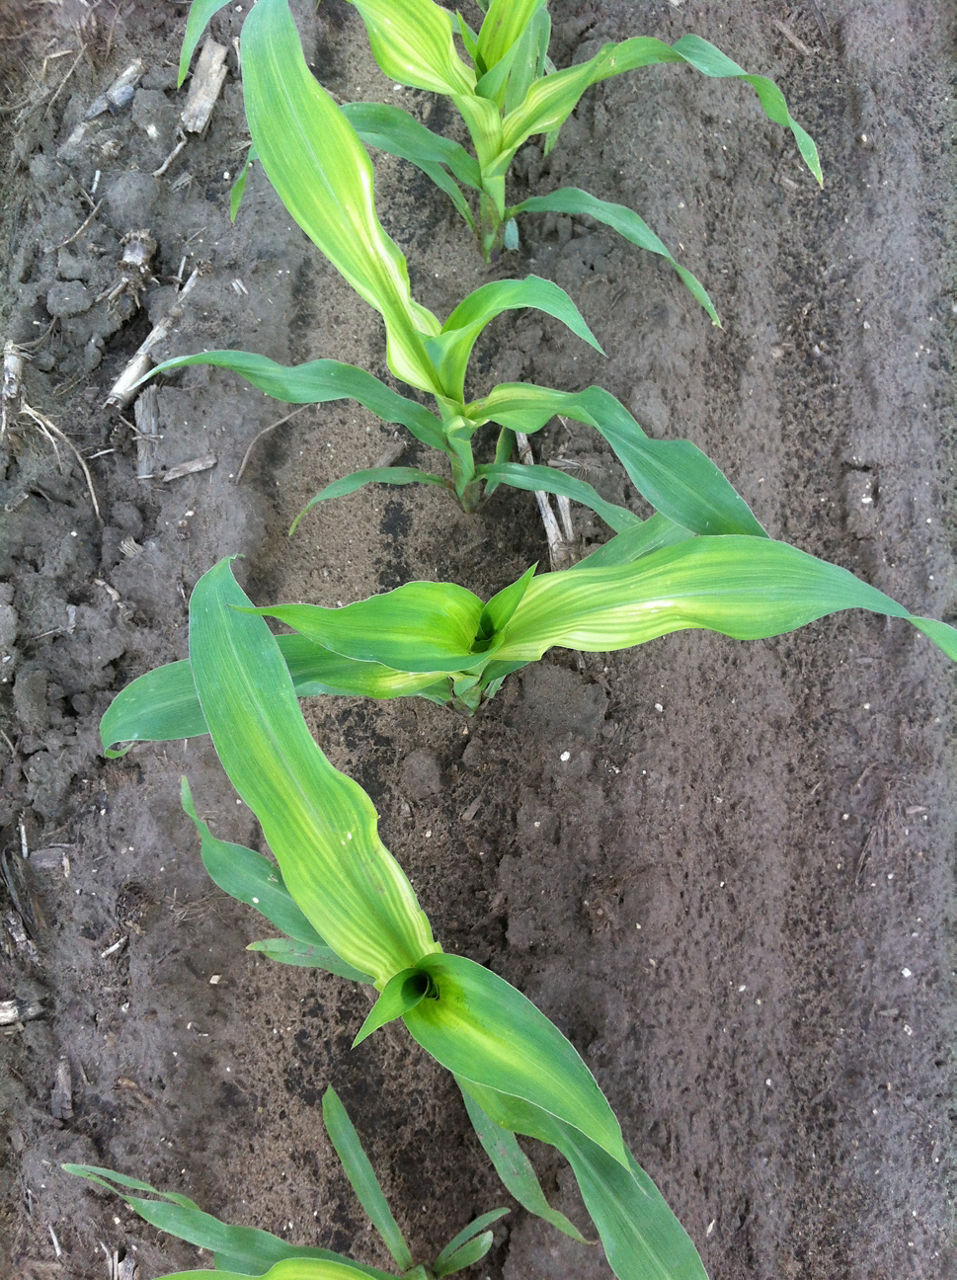 Characteristic zinc deficiency with youngest leaves showing whitish bands or stripes starting at the whorl and moving toward the tip